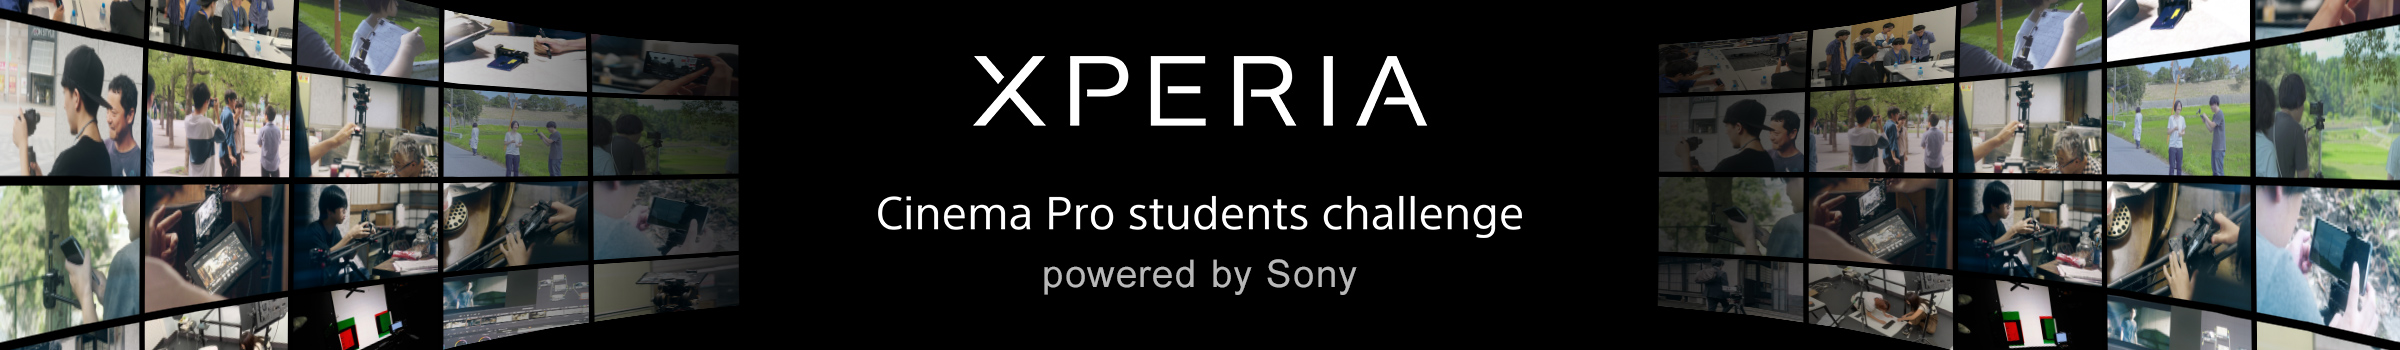 XPERIA Cinema Pro students challenge 2019 powered by Sony